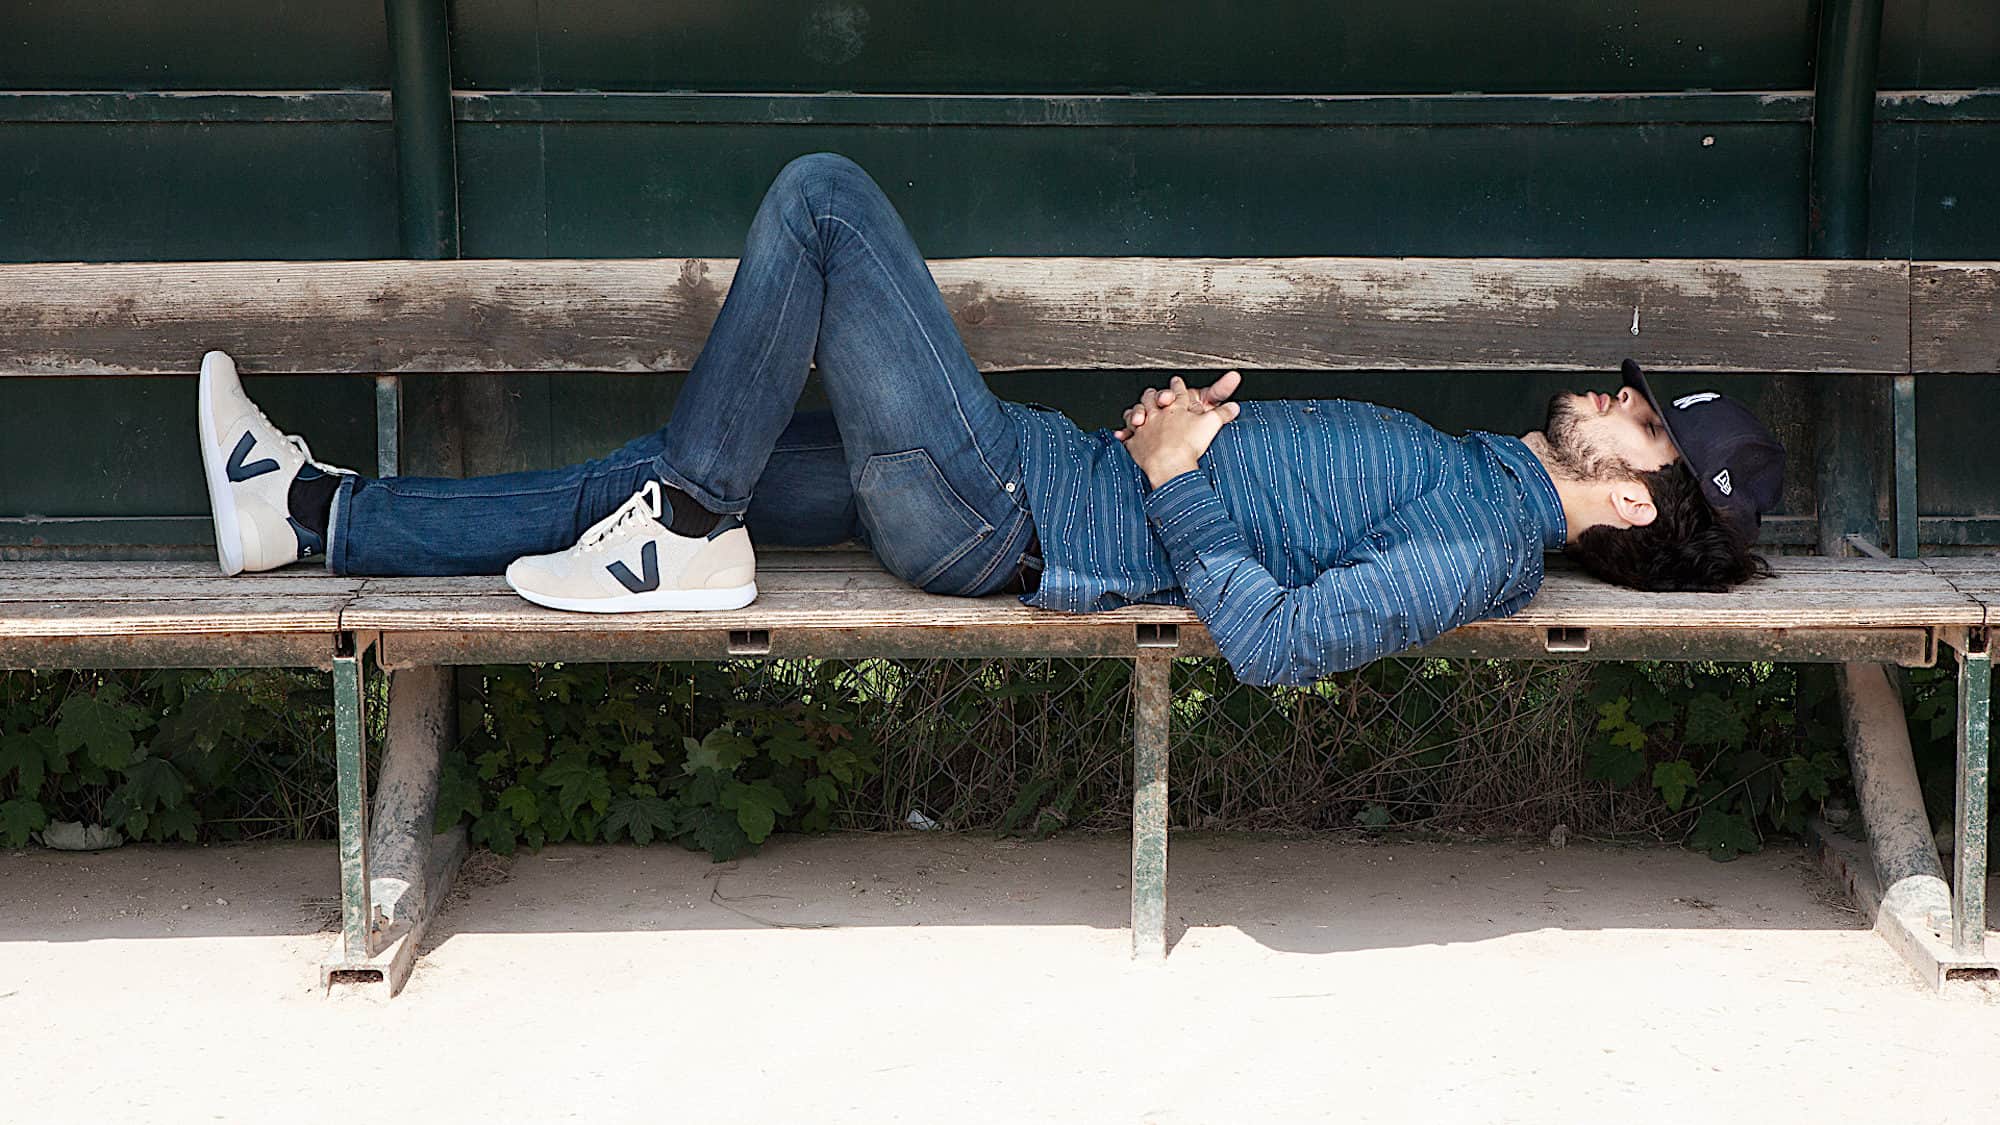 Sustainably made Veja trainers are also go-tos for Parisian men, like this young man wearing jeans and blue shirt, lying on a bench sleeping.